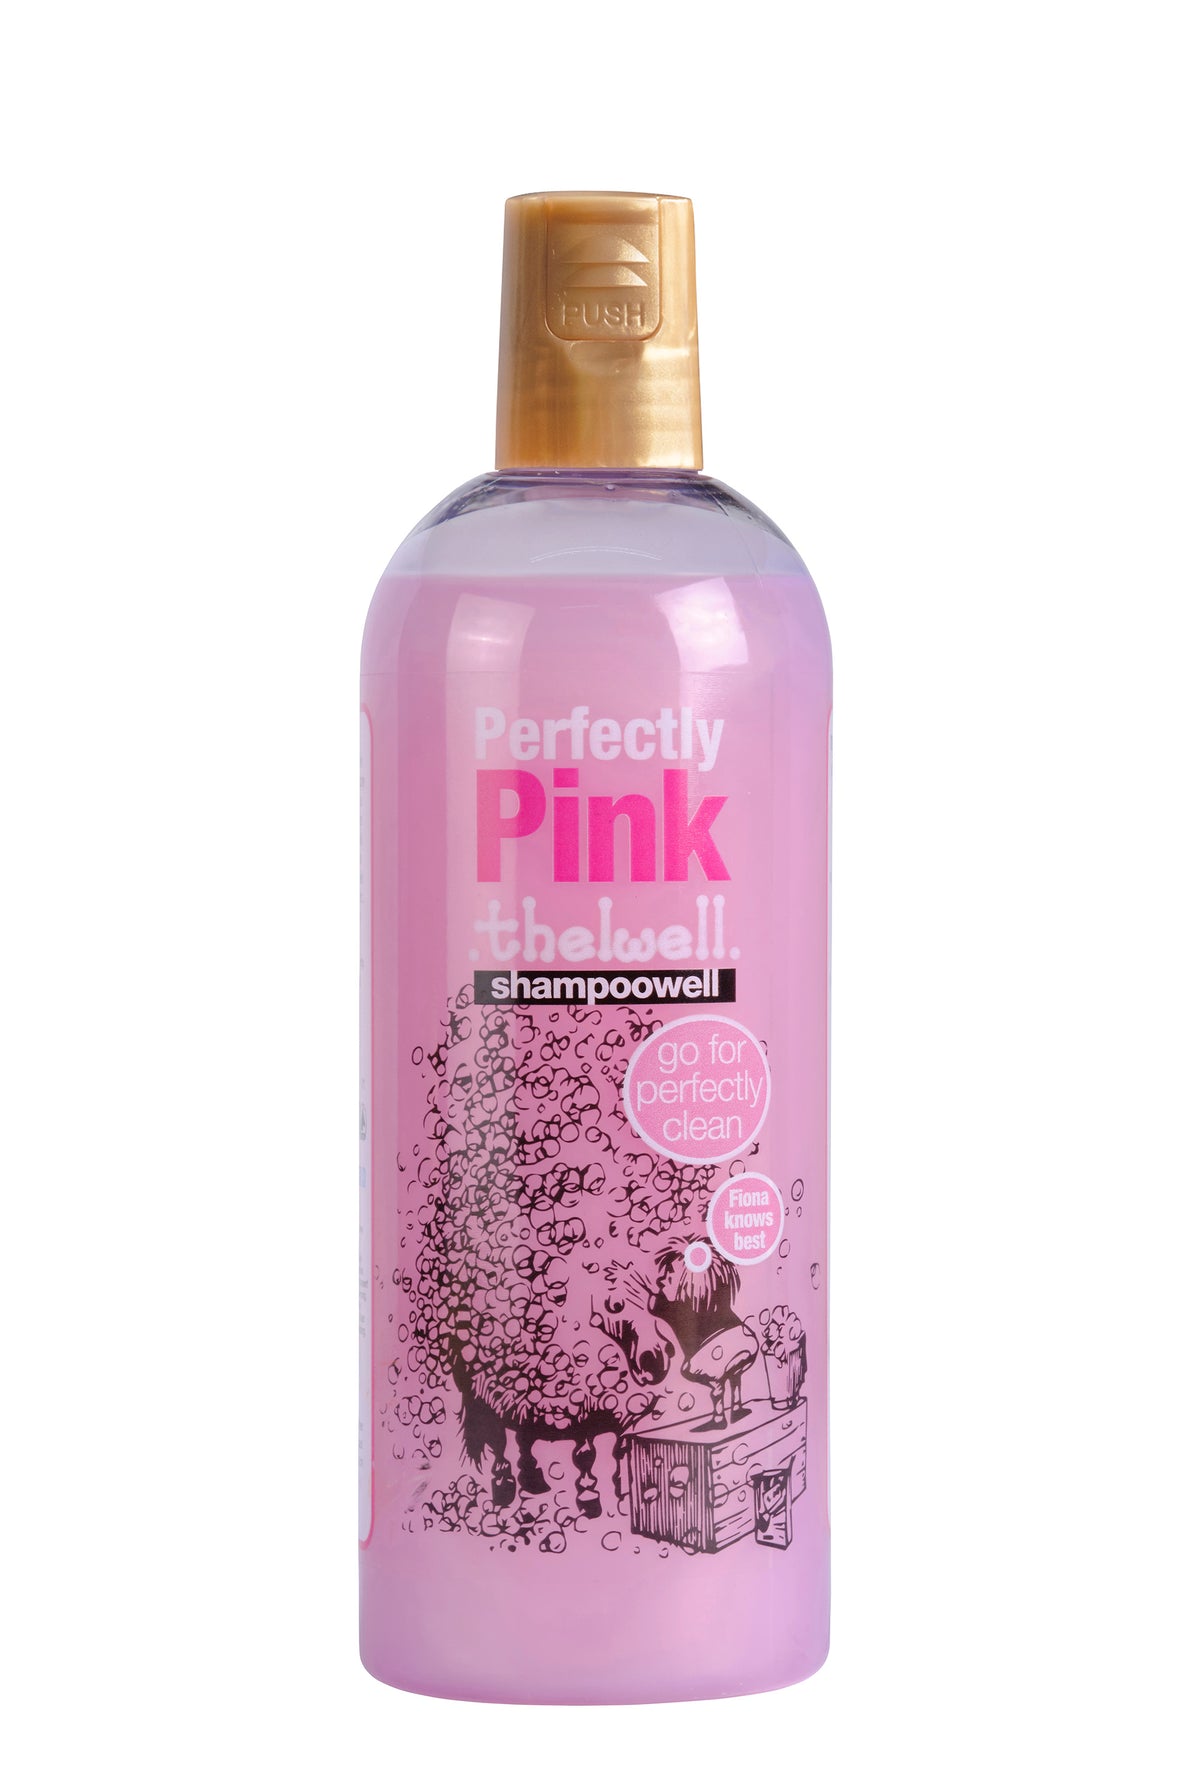 Thelwell perfectly pink shampoo